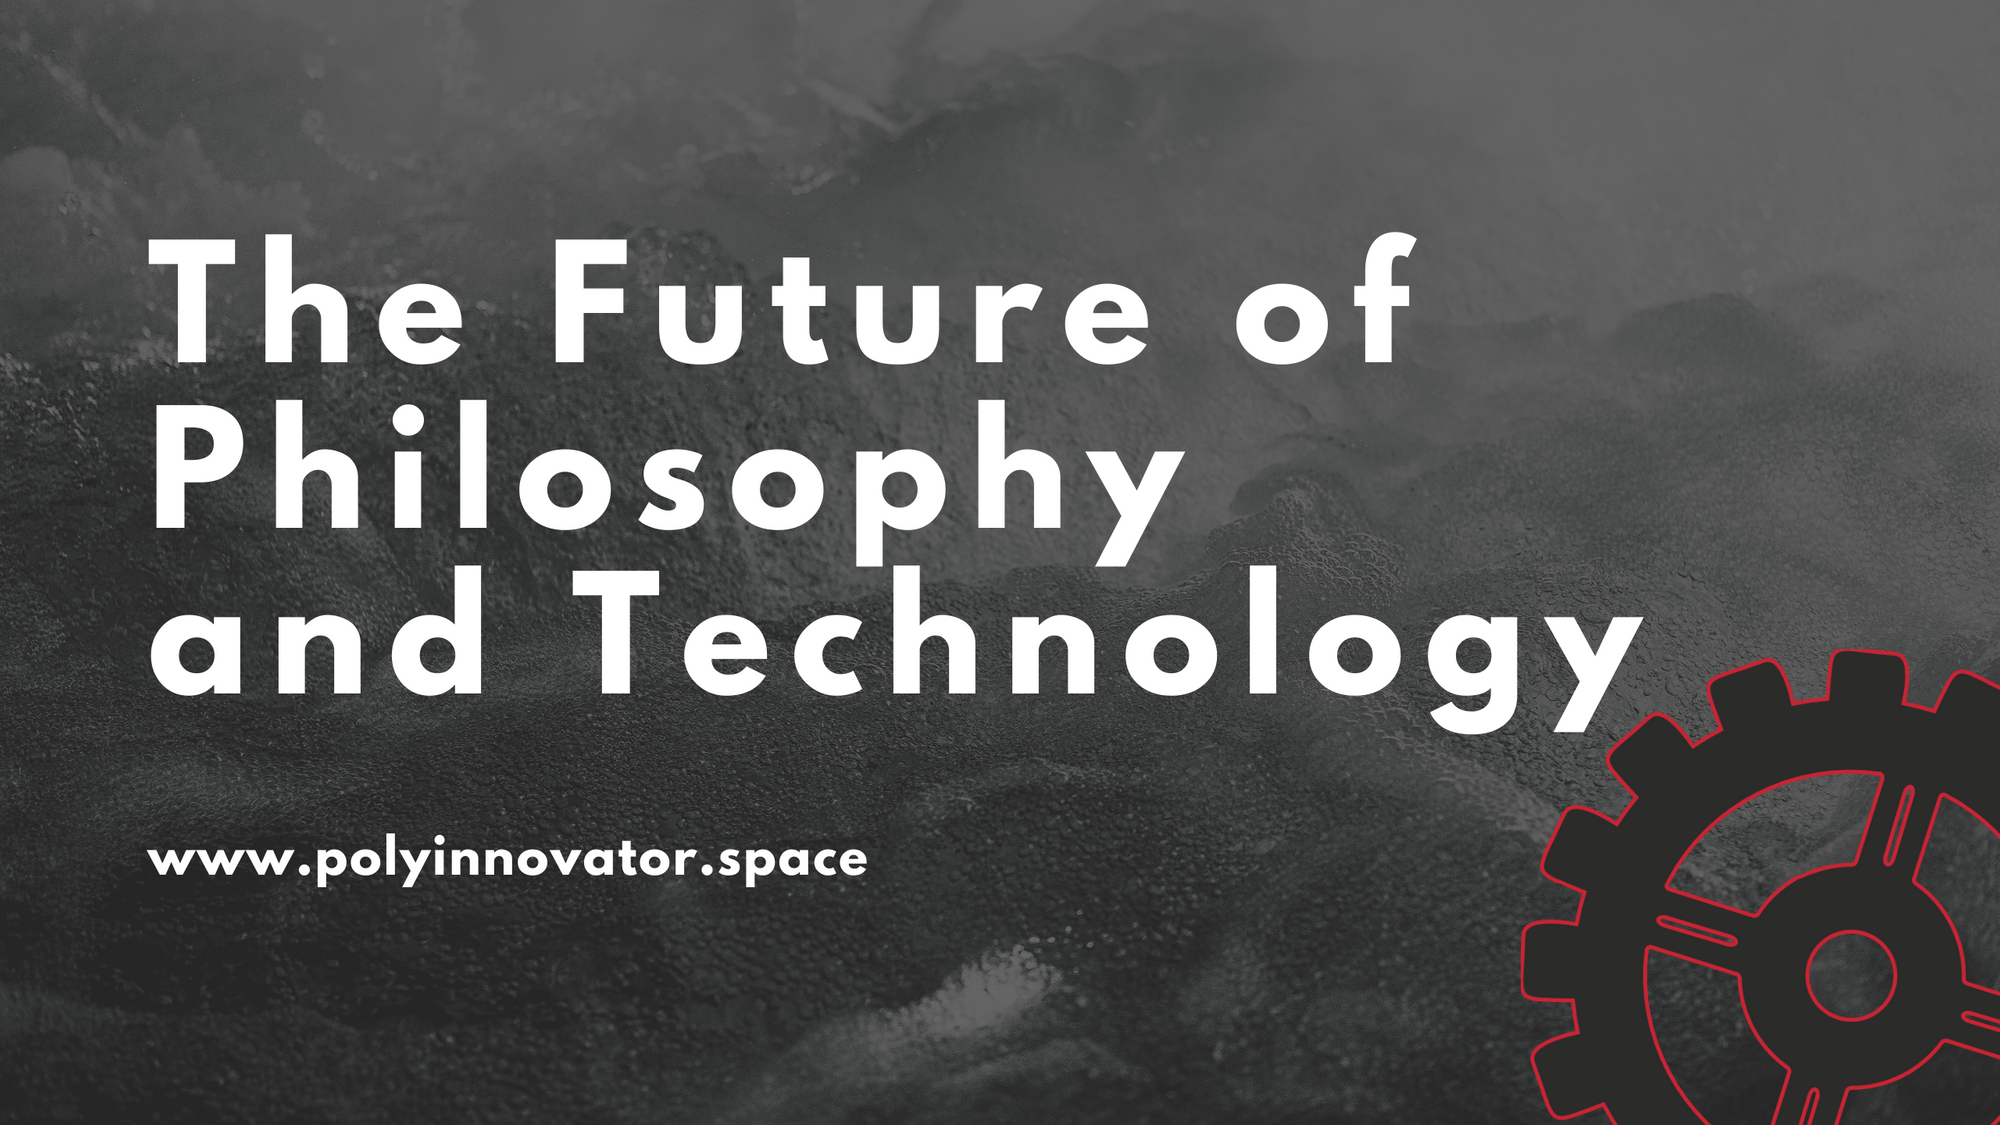 The Future of Philosophy and Technology